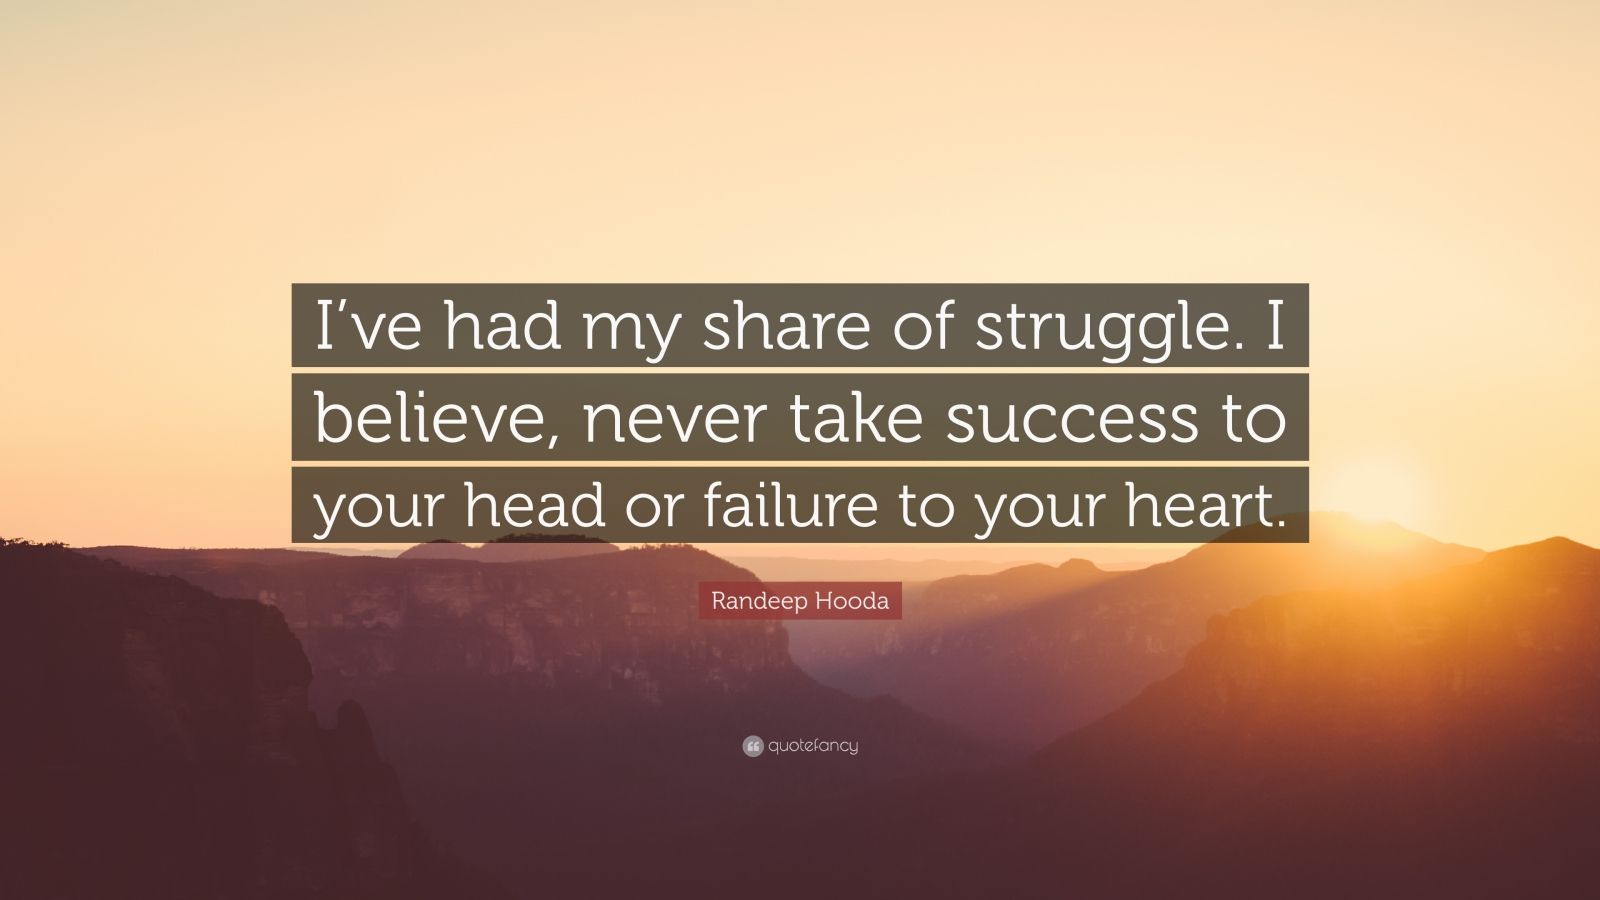 Randeep Hooda Quote: “I’ve had my share of struggle. I believe, never take success to your head or failure to your heart.”